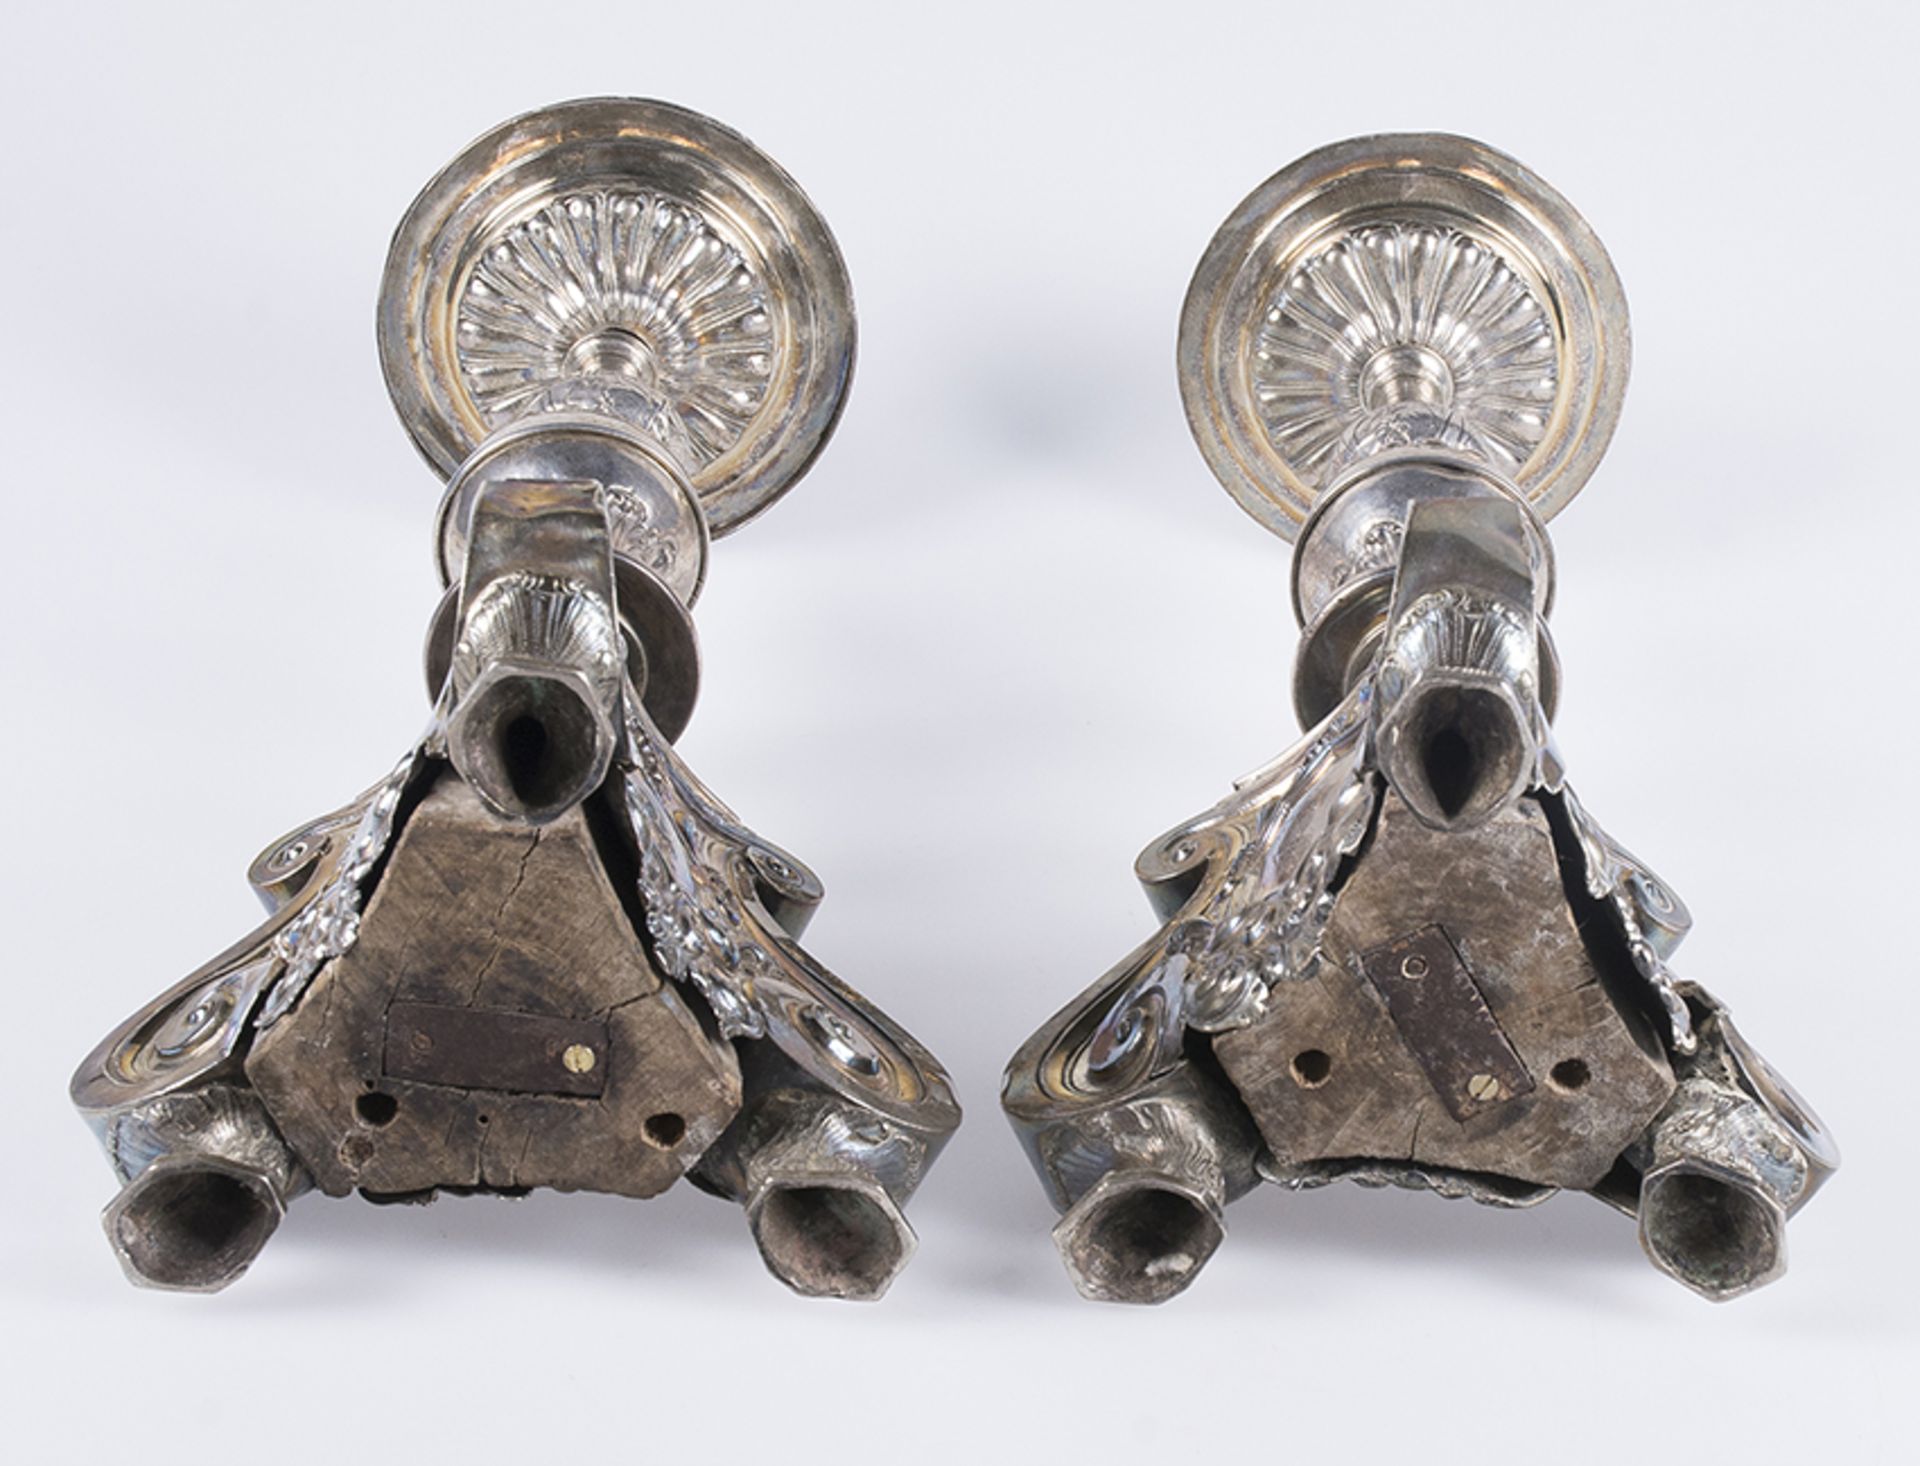 Pair of carved, embossed and chiselled silver candlesticks punched with the &quot;MAS&quot; mark by - Image 5 of 5